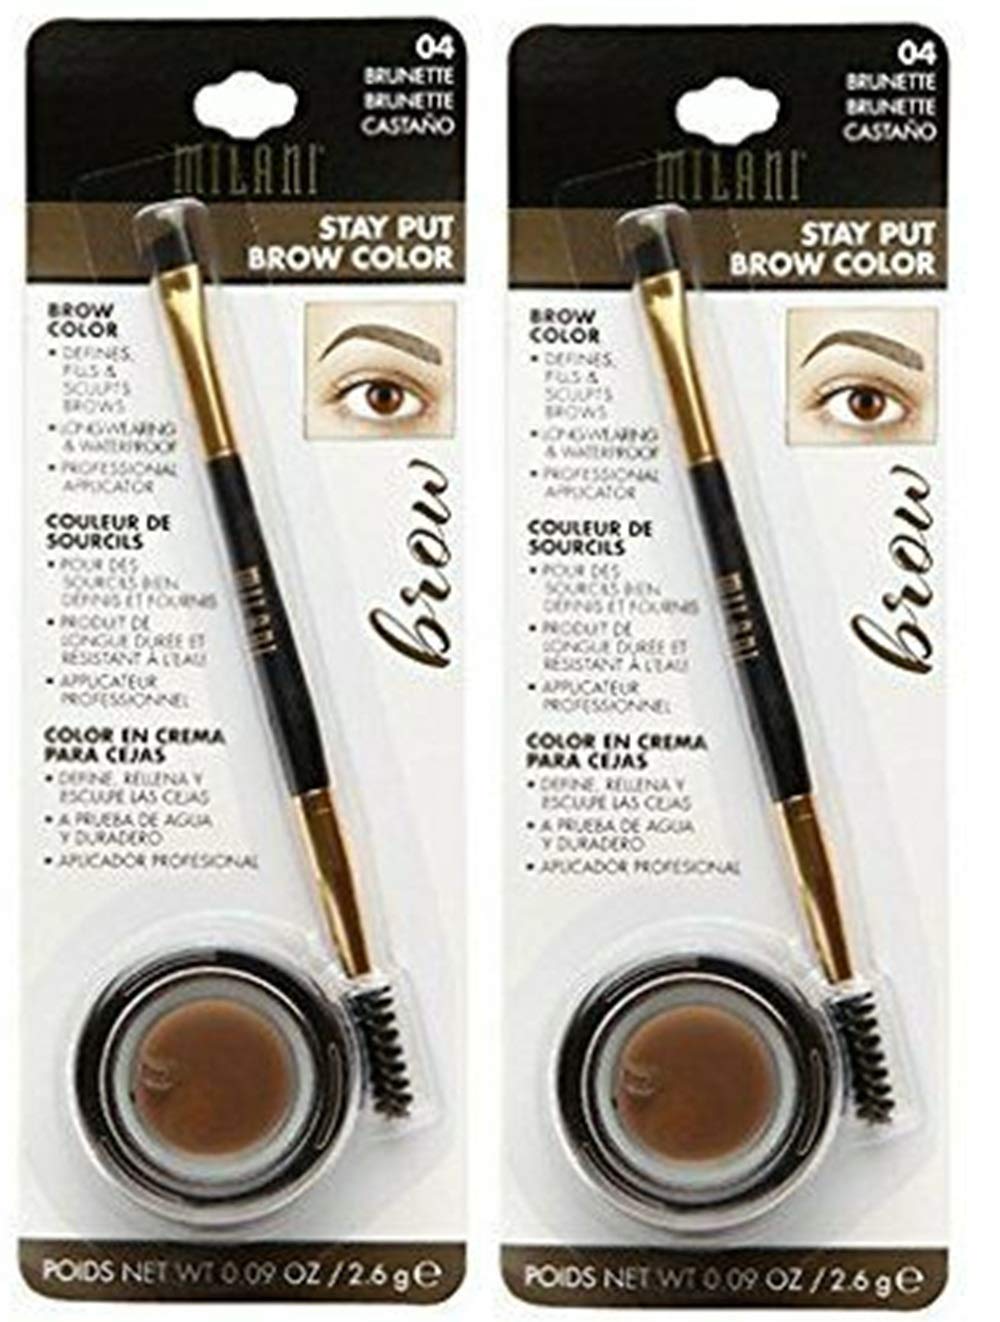 Pack of 2 Milani Stay Put Brow Color, Brunette (04)